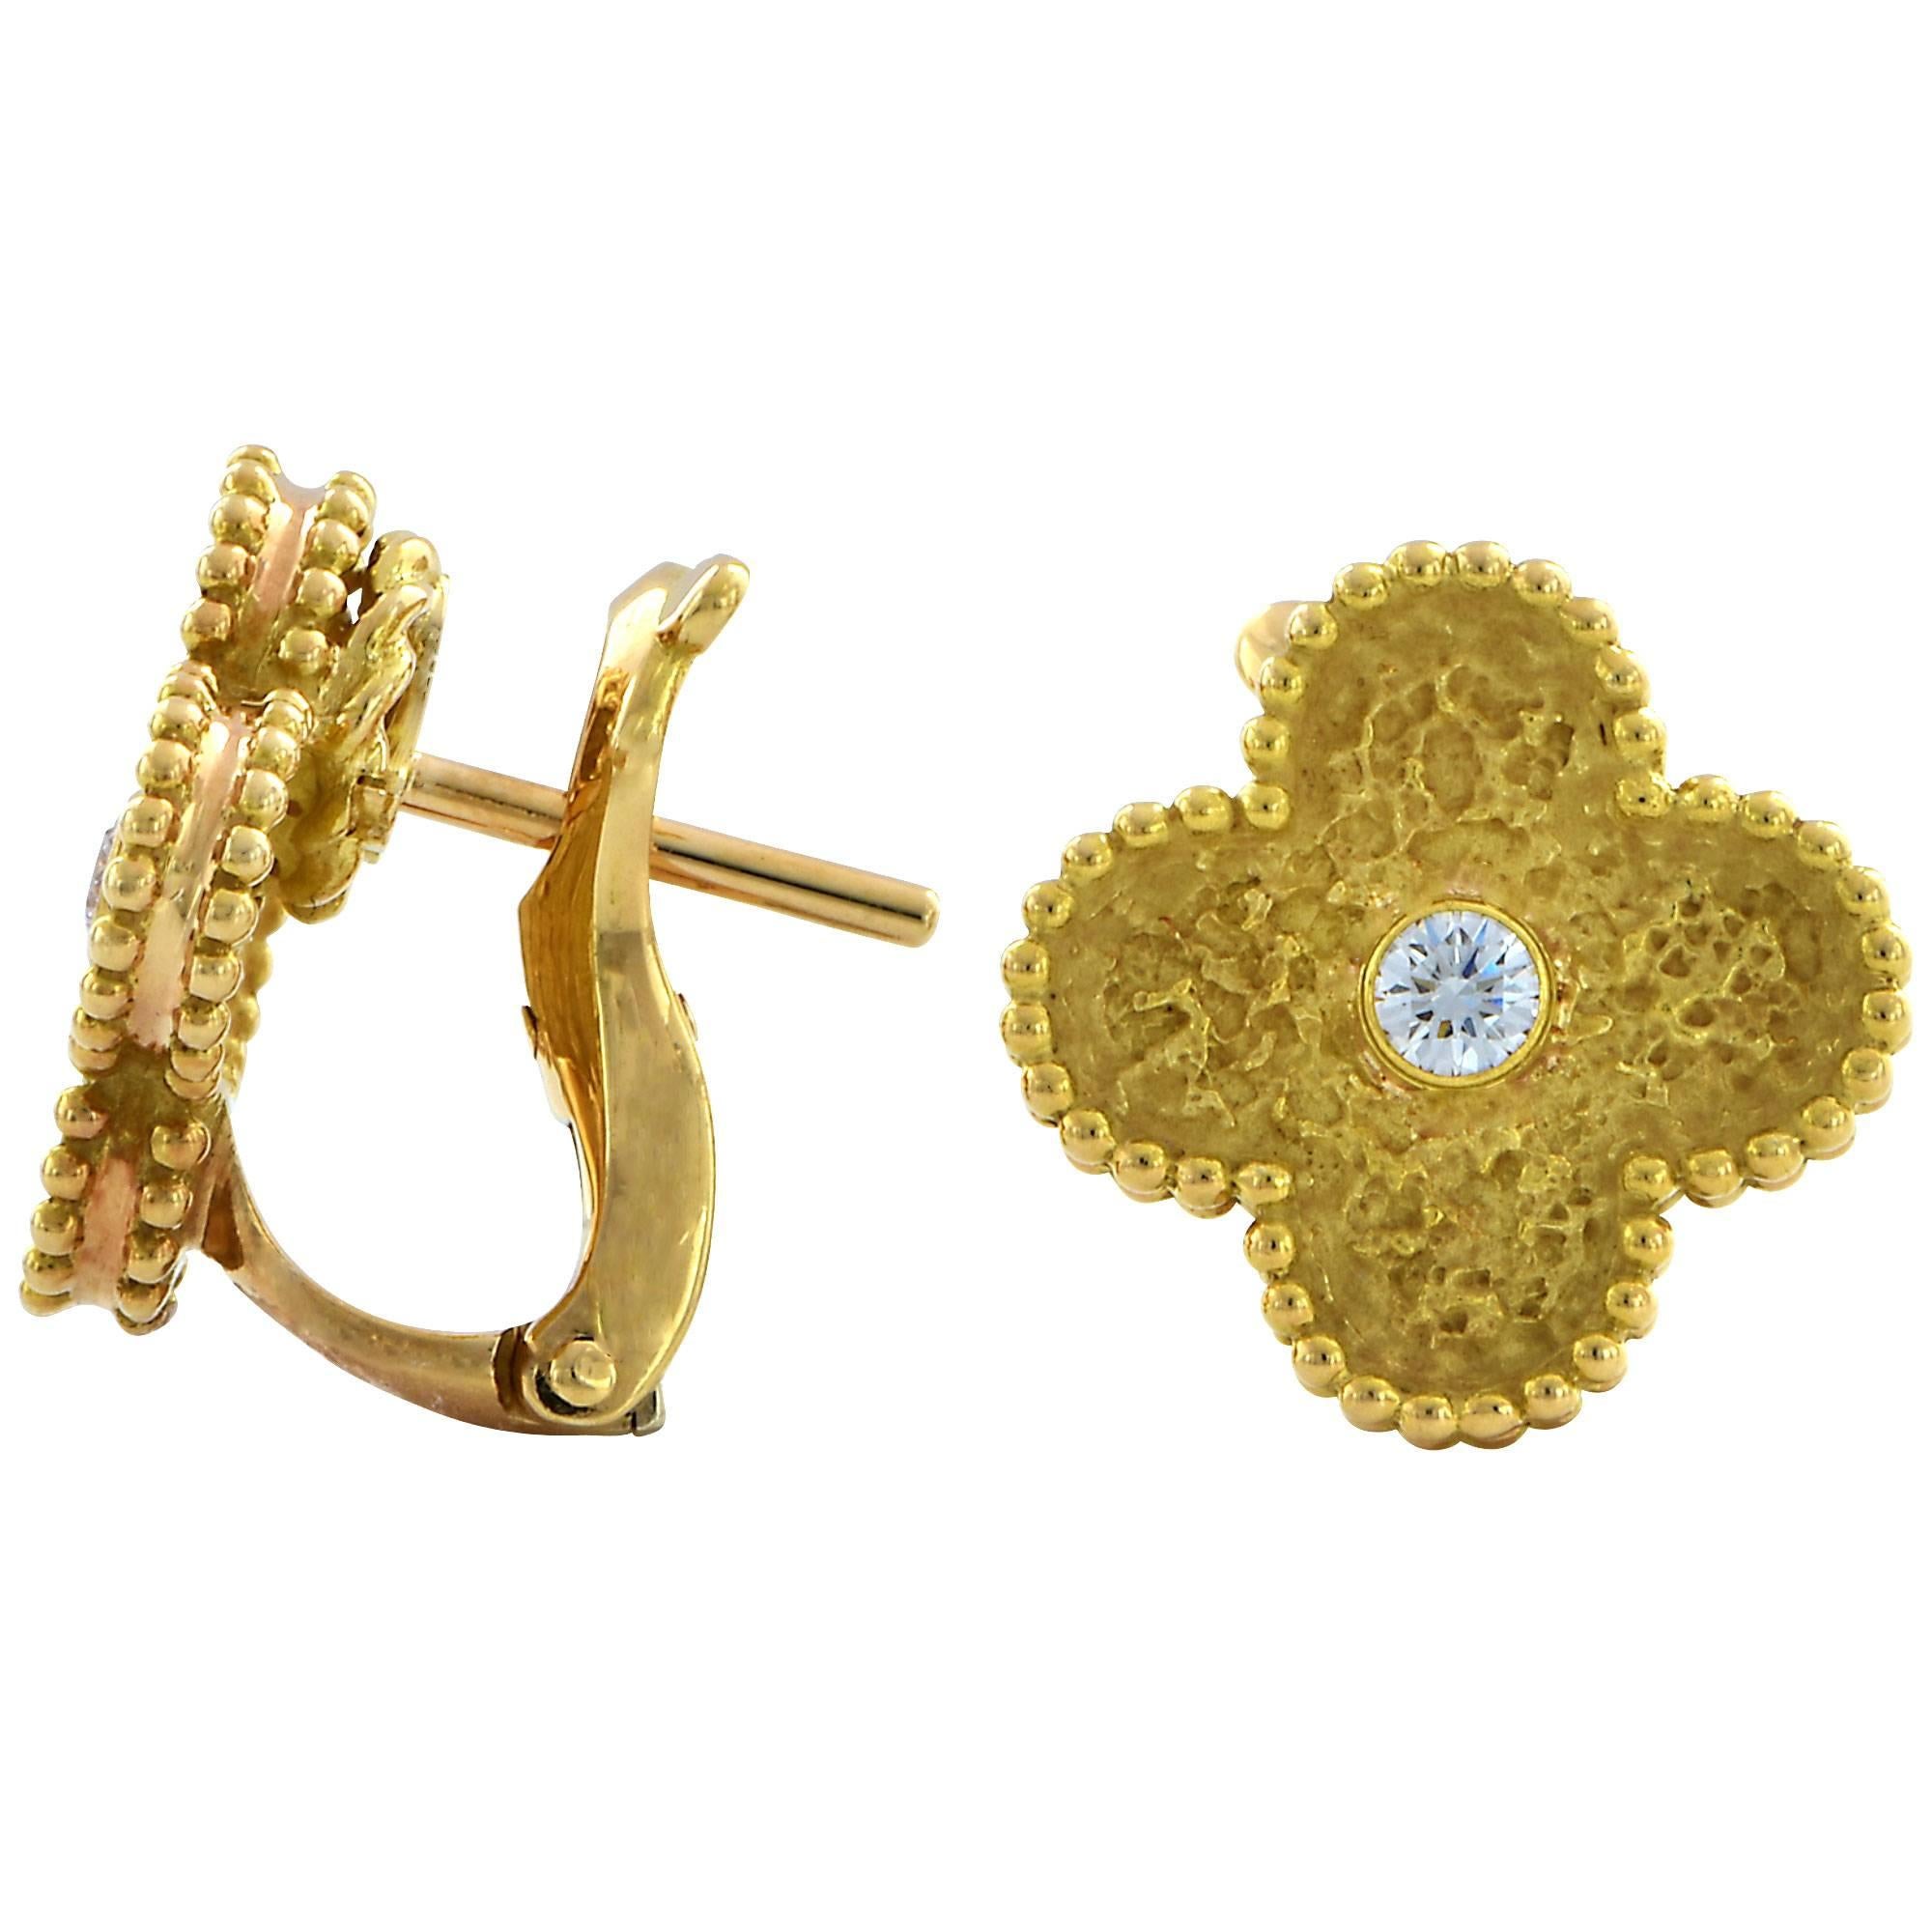 Van Cleef & Arpels Vintage Alhambra diamond earrings, can be worn with a post or as clip-on.

The earrings measure 13.6mm.
It is stamped and/or tested as 18k gold.
The metal weight is 7.61 grams.

These diamond and gold earrings are accompanied